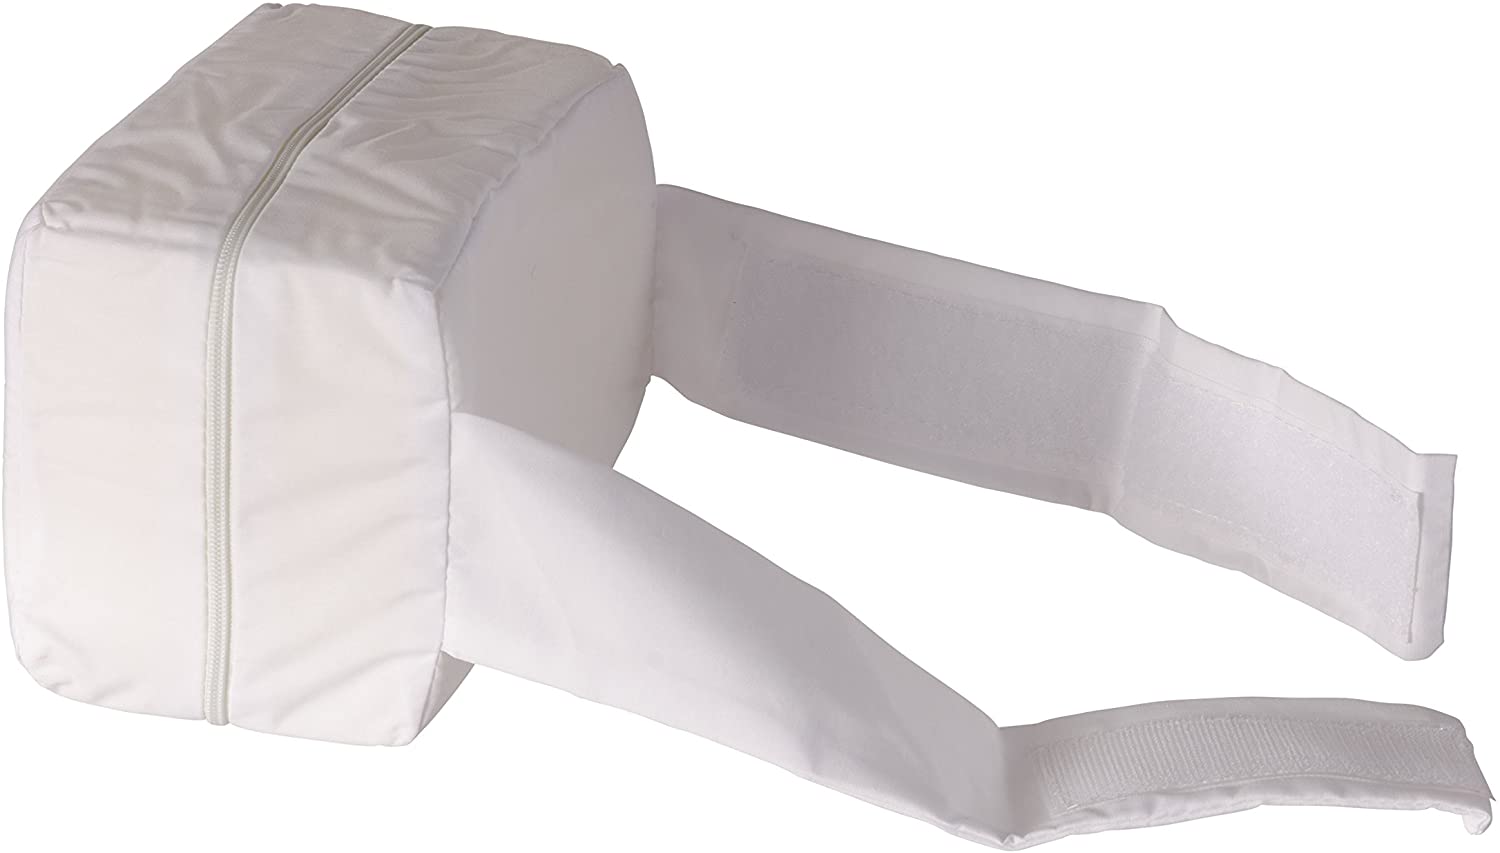 DMI Hypoallergenic Orthopedic Knee-Ease Foam Wedge Knee Rest Support Pillow to Put Between Knees with Hook and Loop Adjustment, 7 x 4 x 5 Inches, White